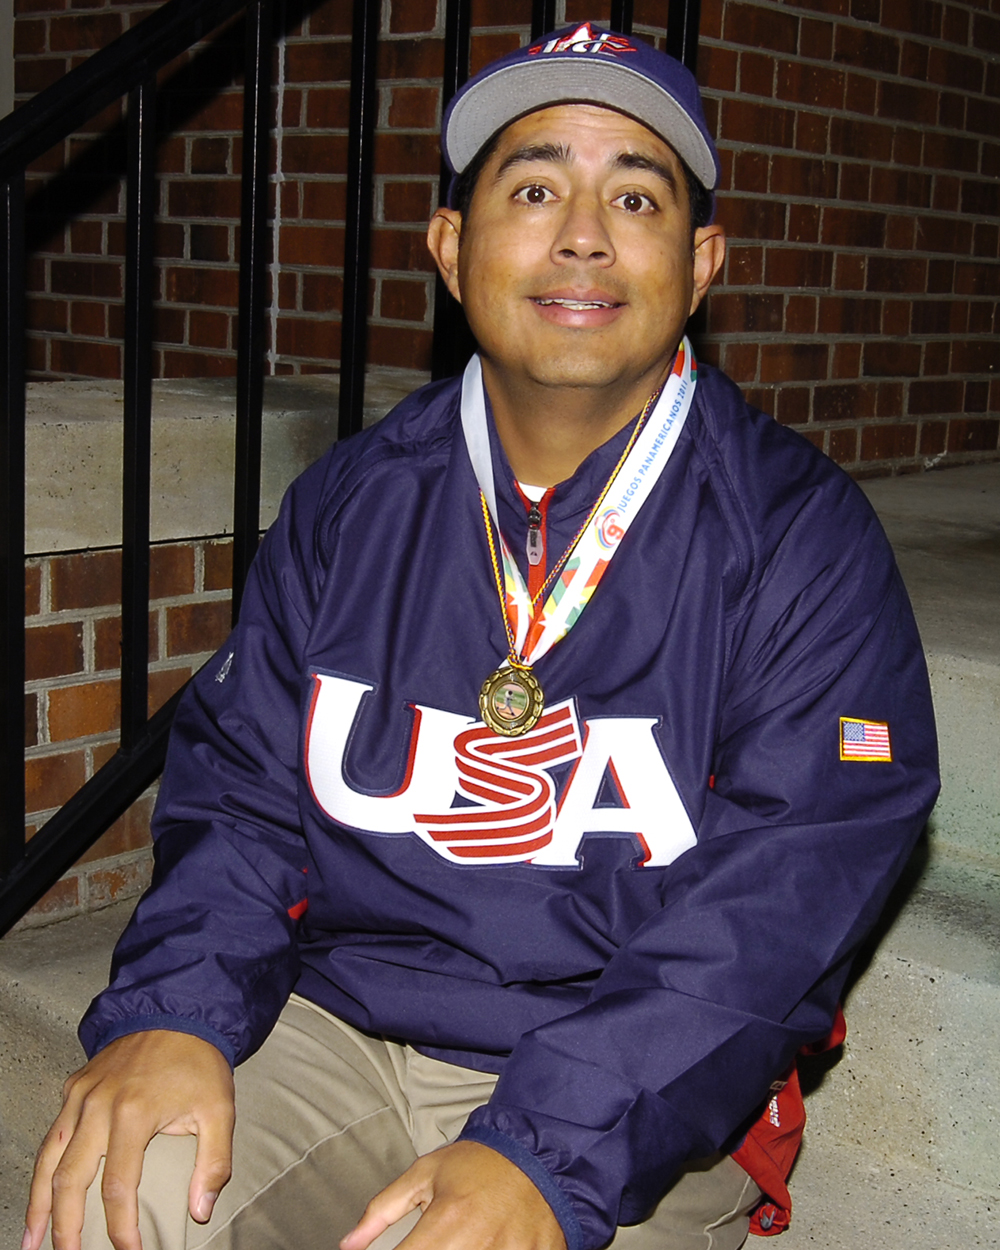 Aldo Plata '03 with his gold medal from USA Baseball.